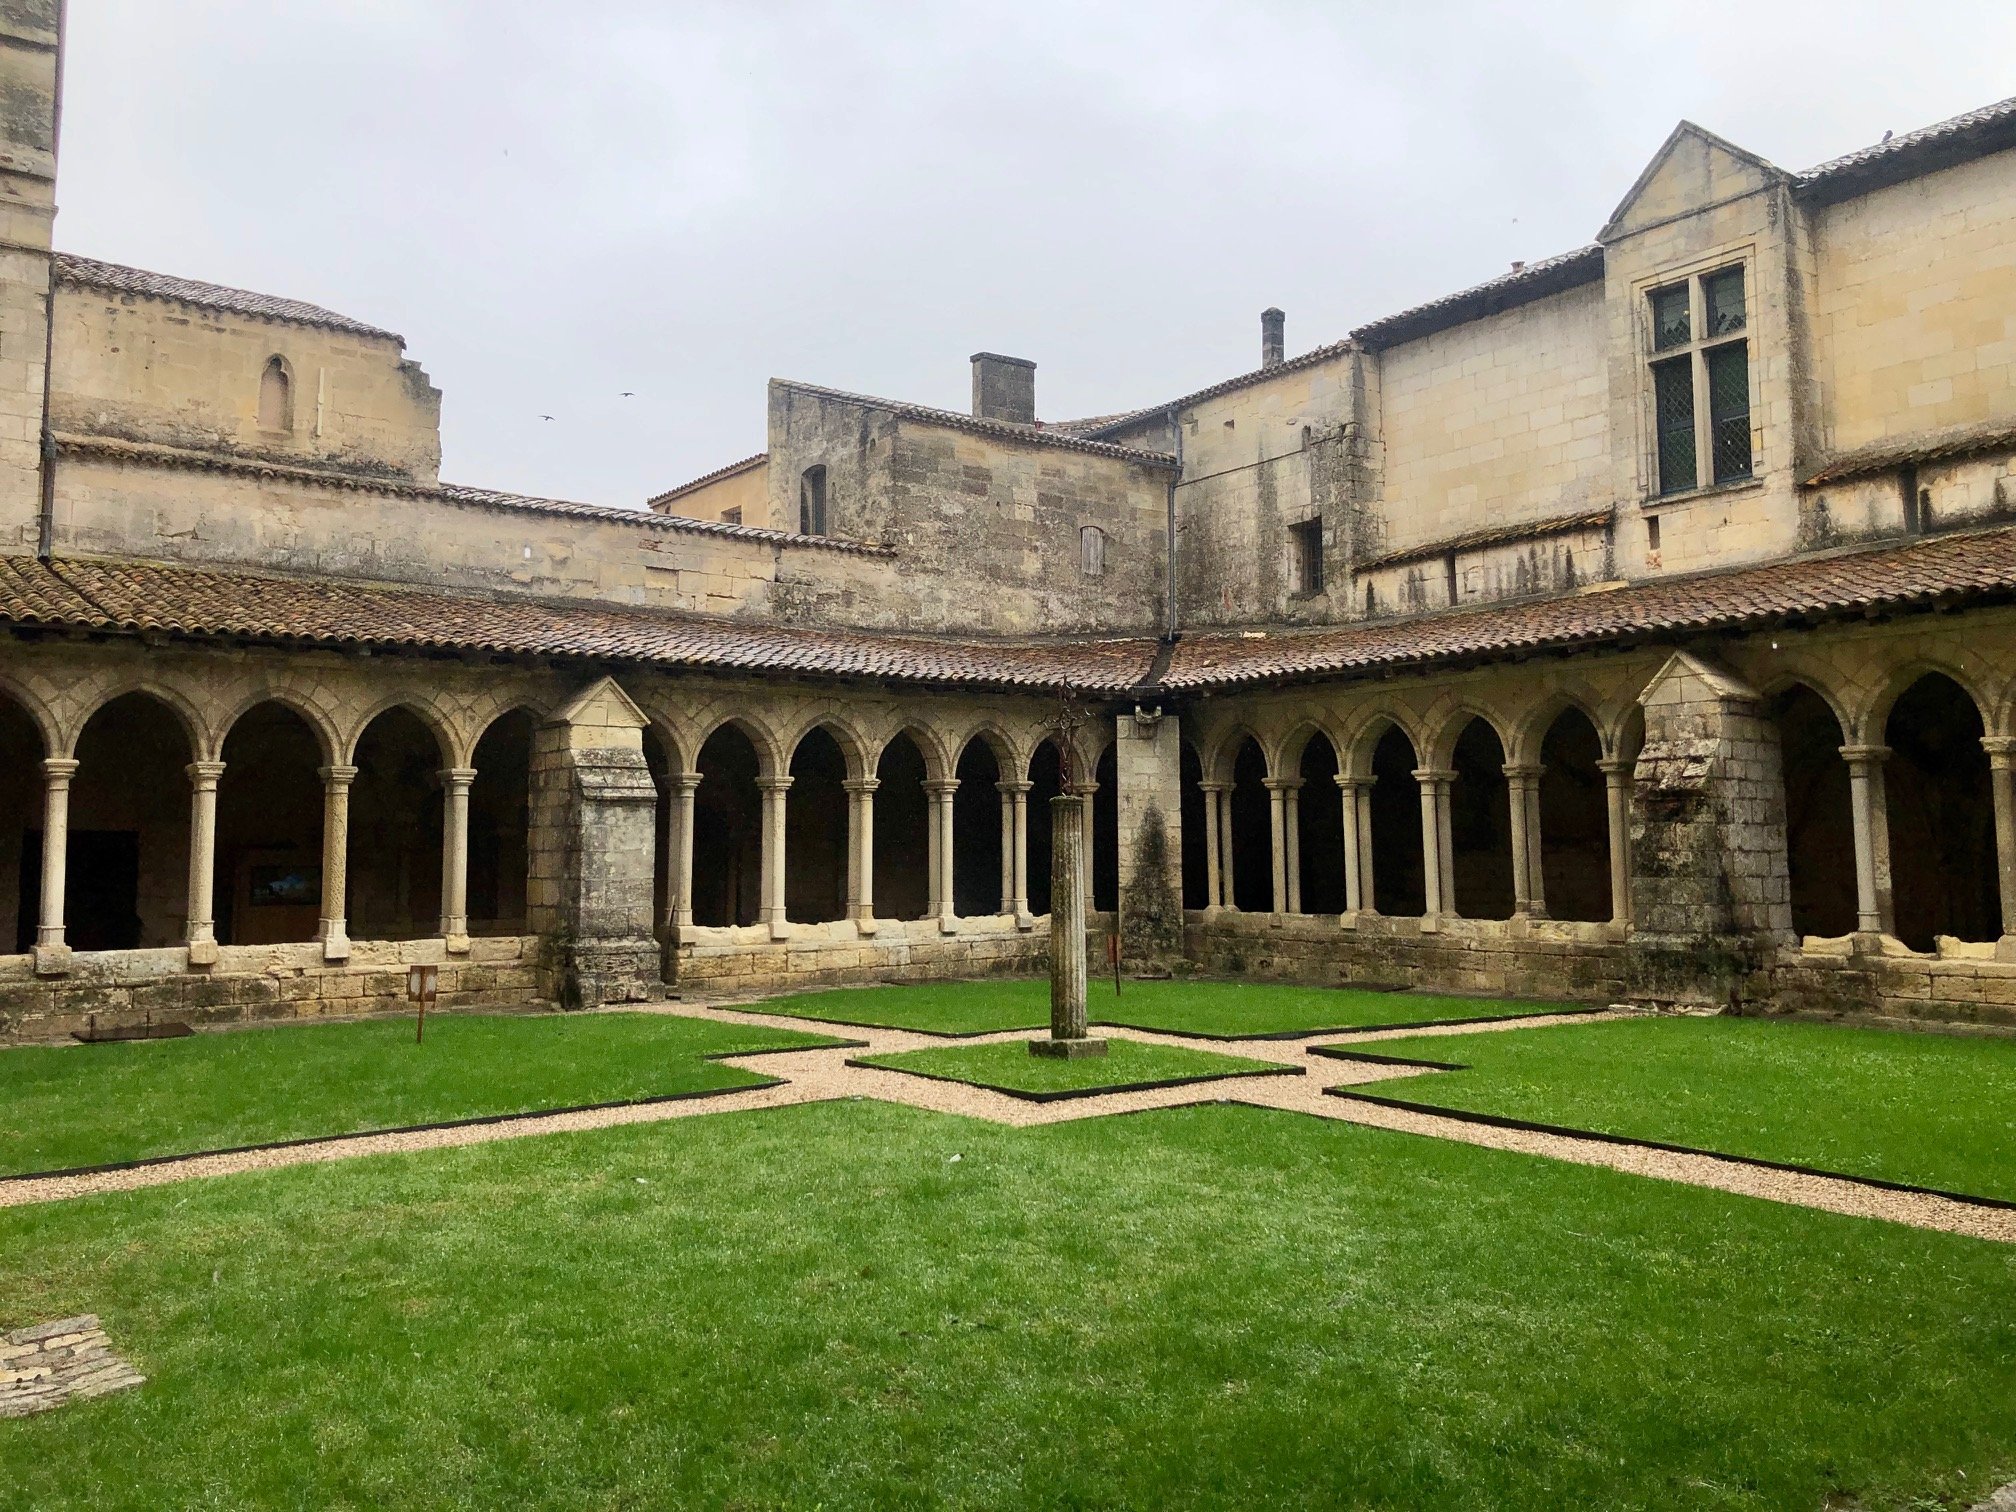  The interior of the cloister. 